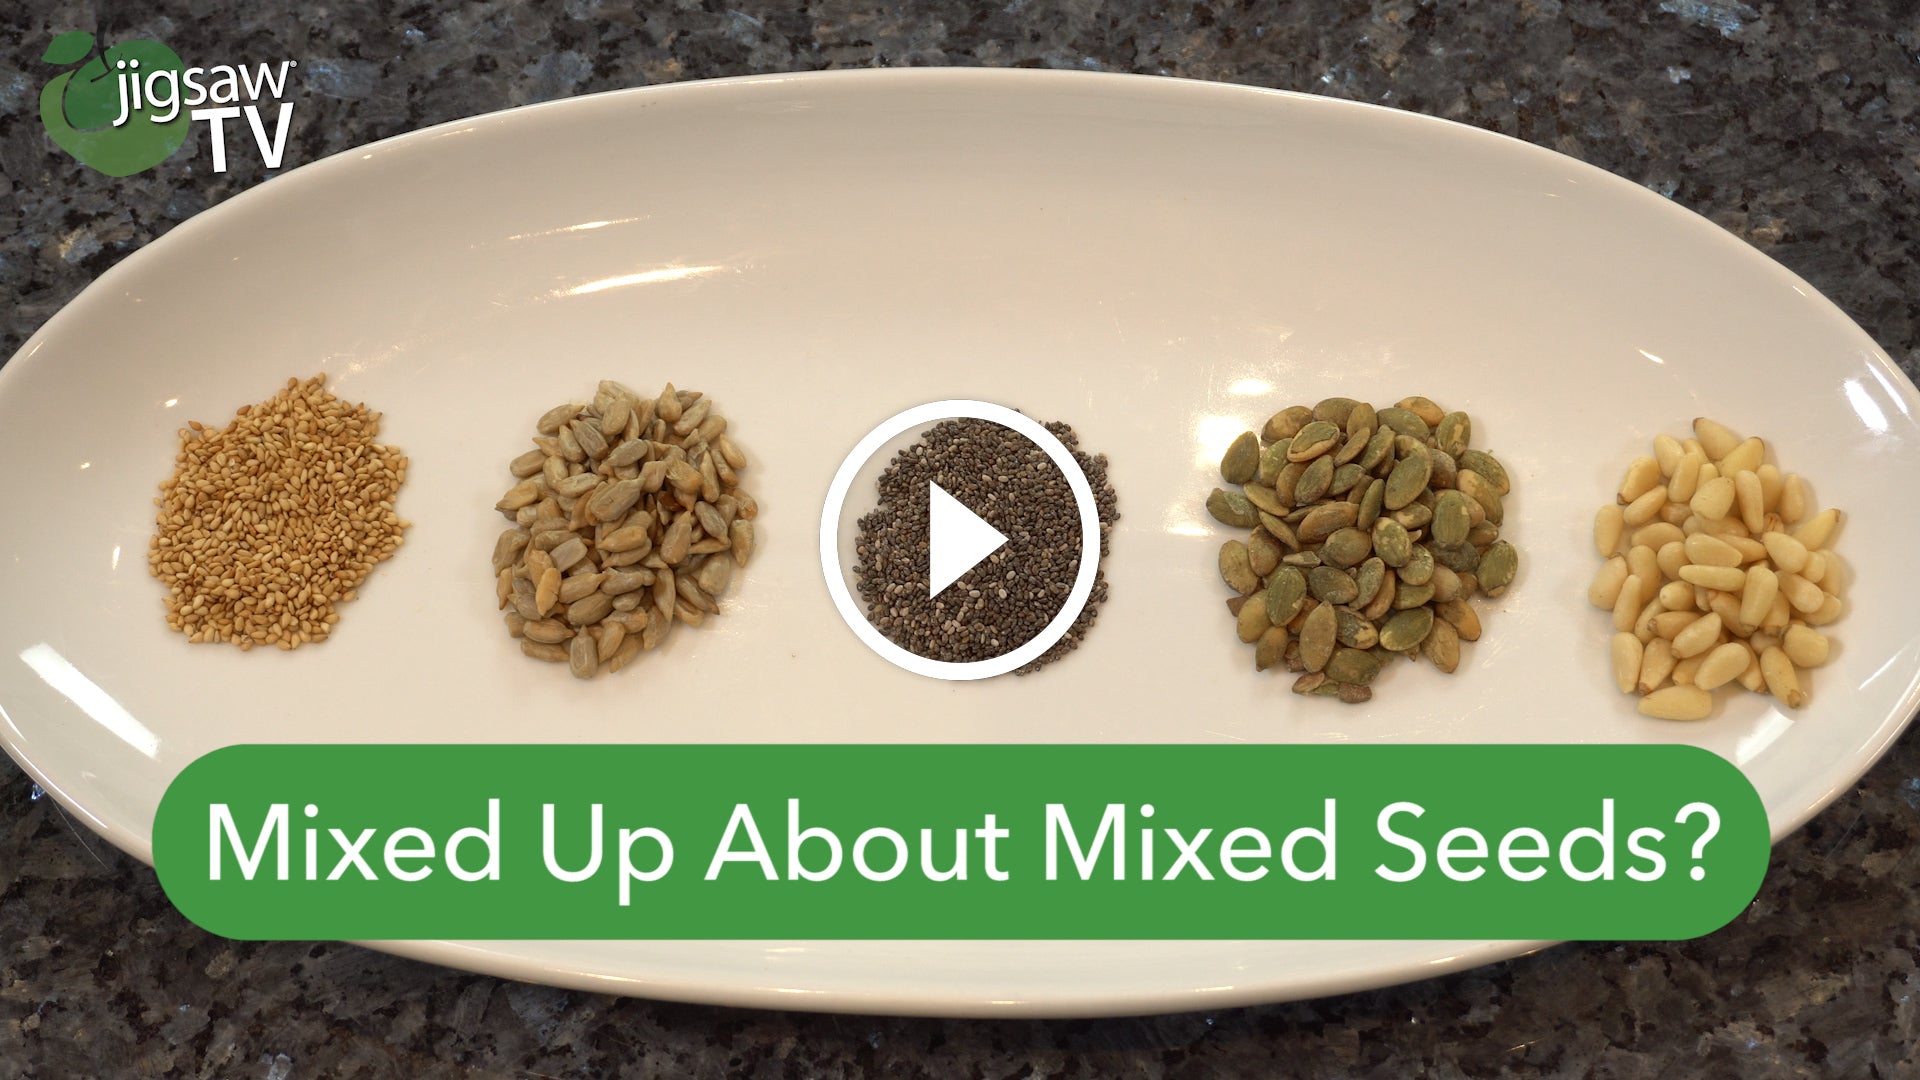 Mixed Up About Mixed Seeds?